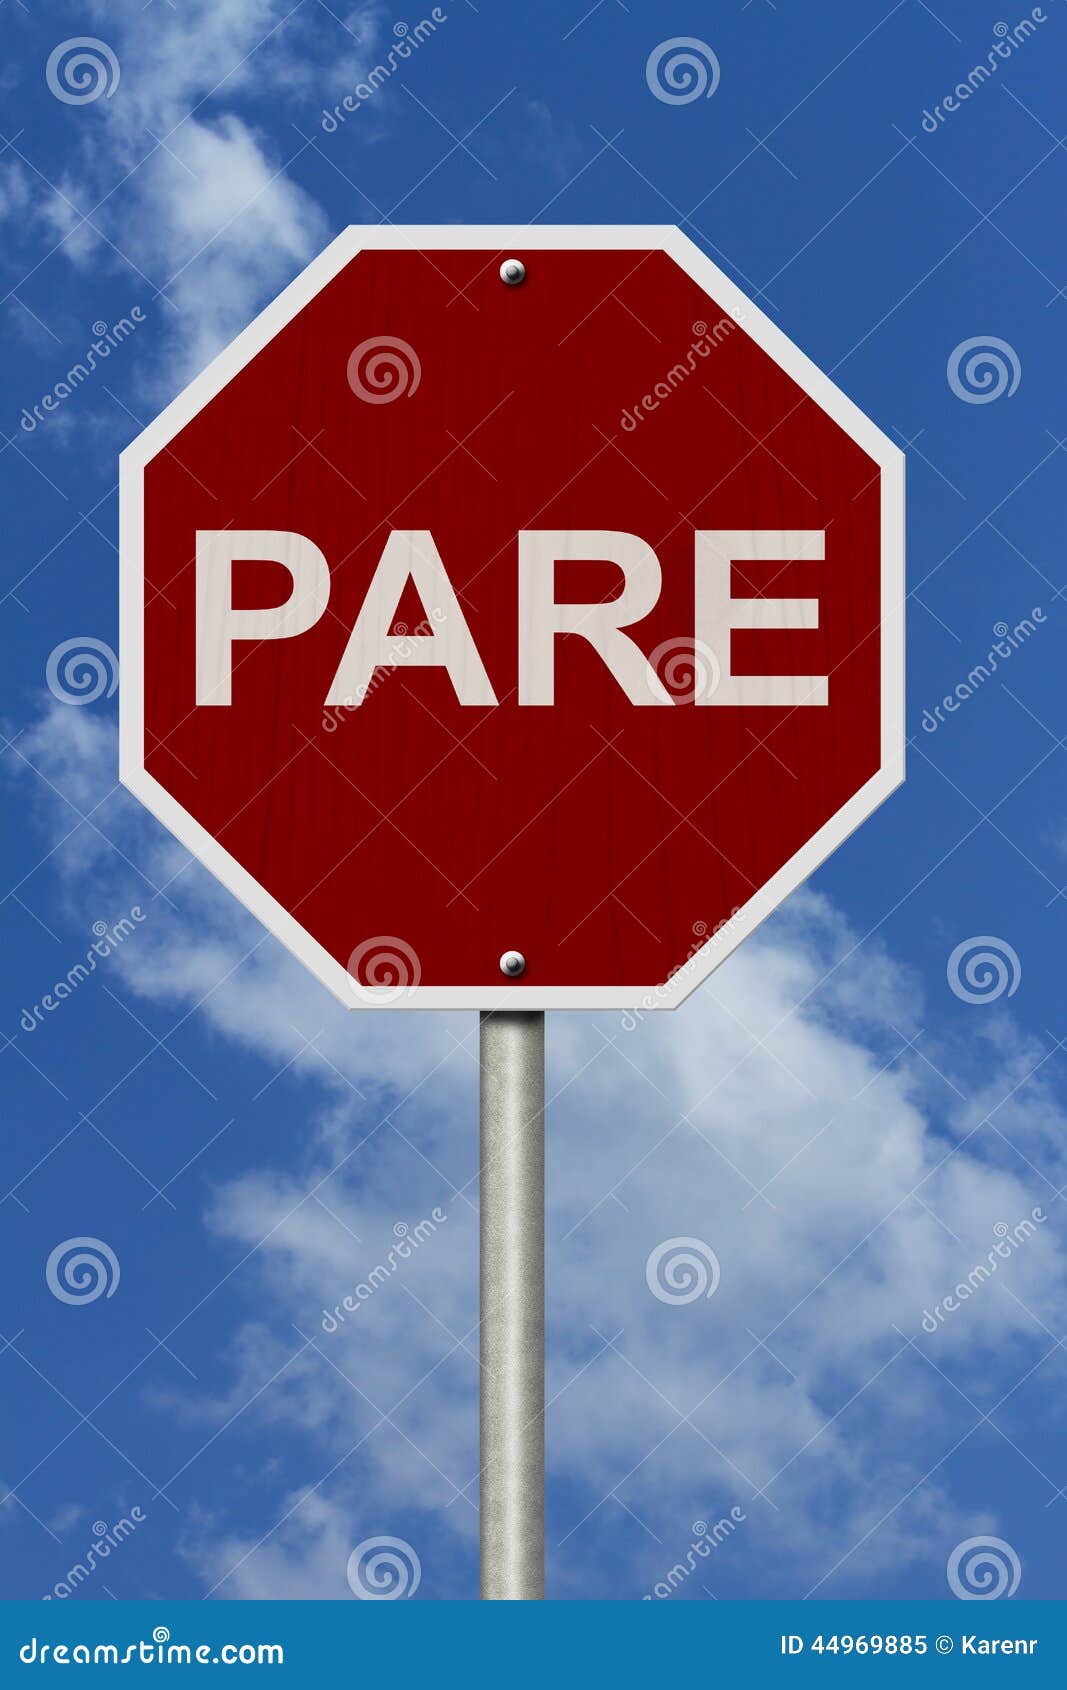 pare sign